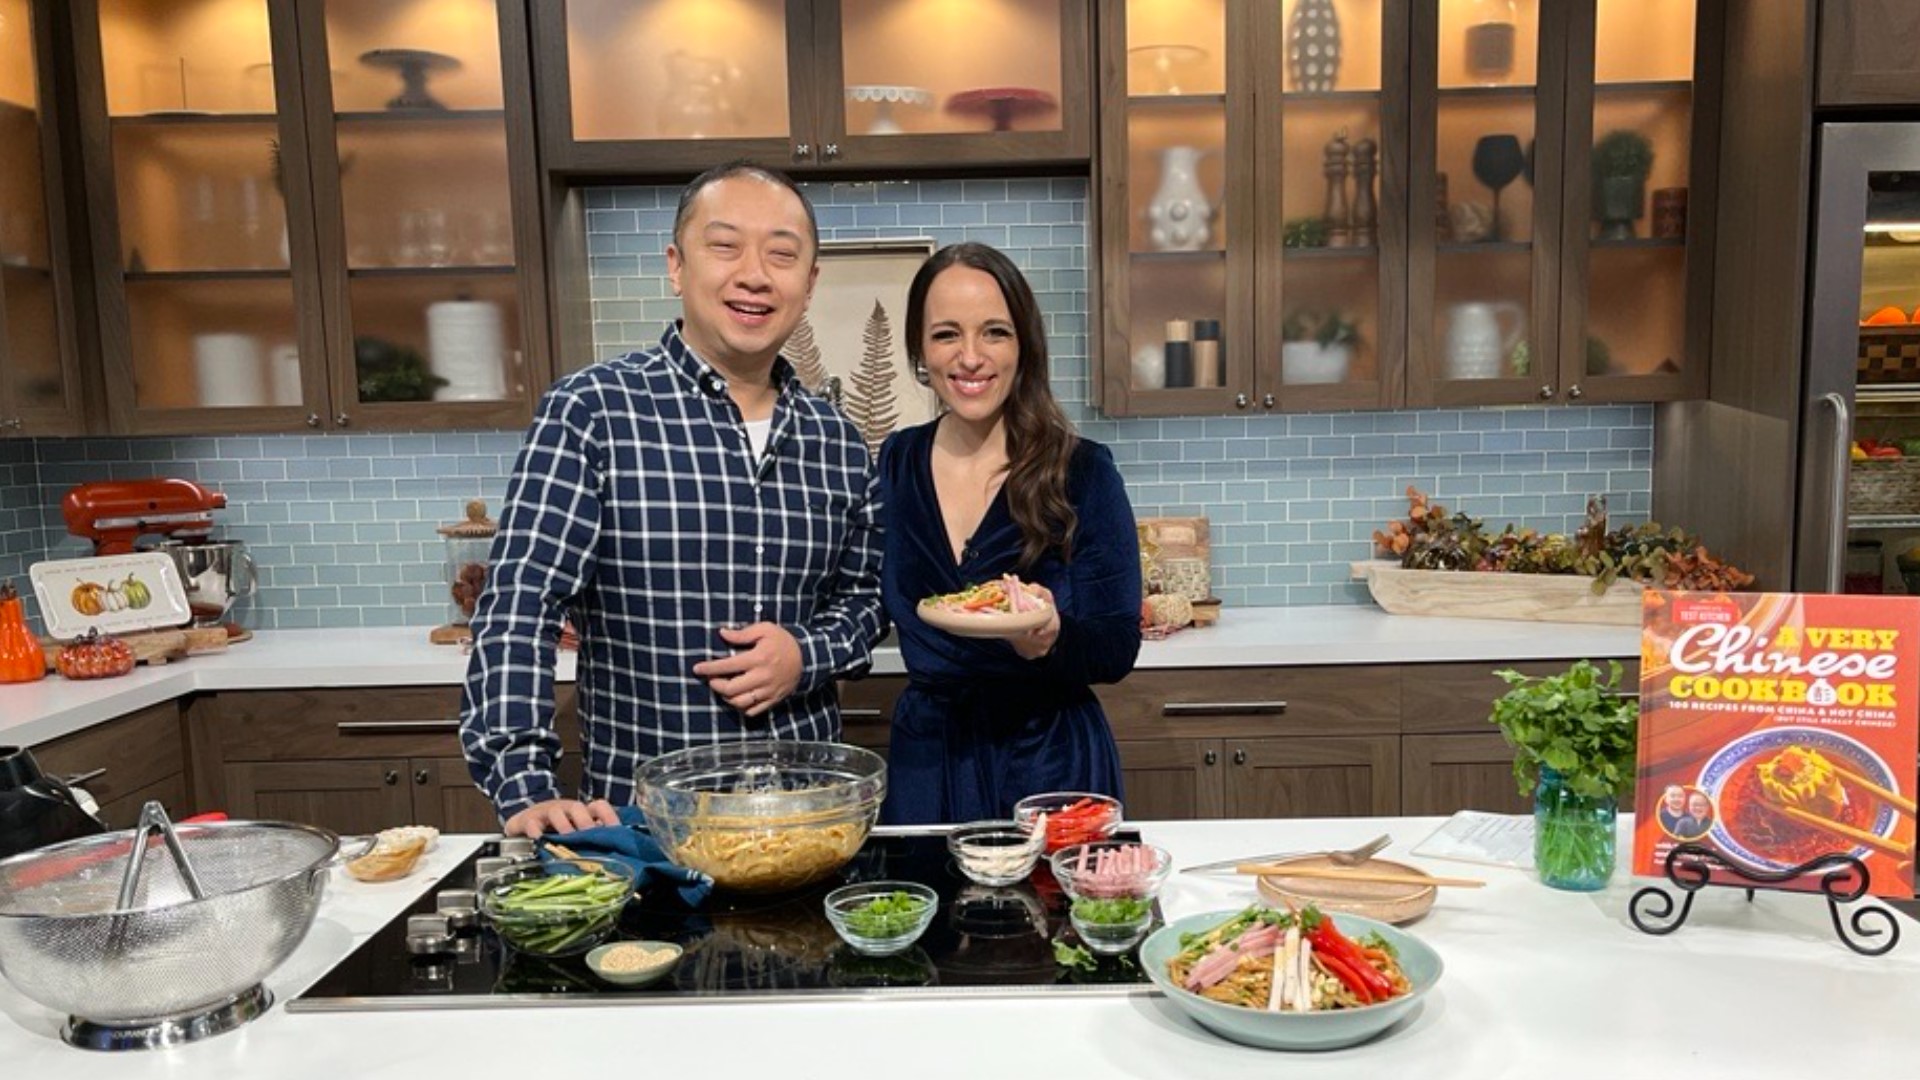 Kevin Pang from "America's Test Kitchen" shares a recipe from his new cookbook "A Very Chinese Cookbook."